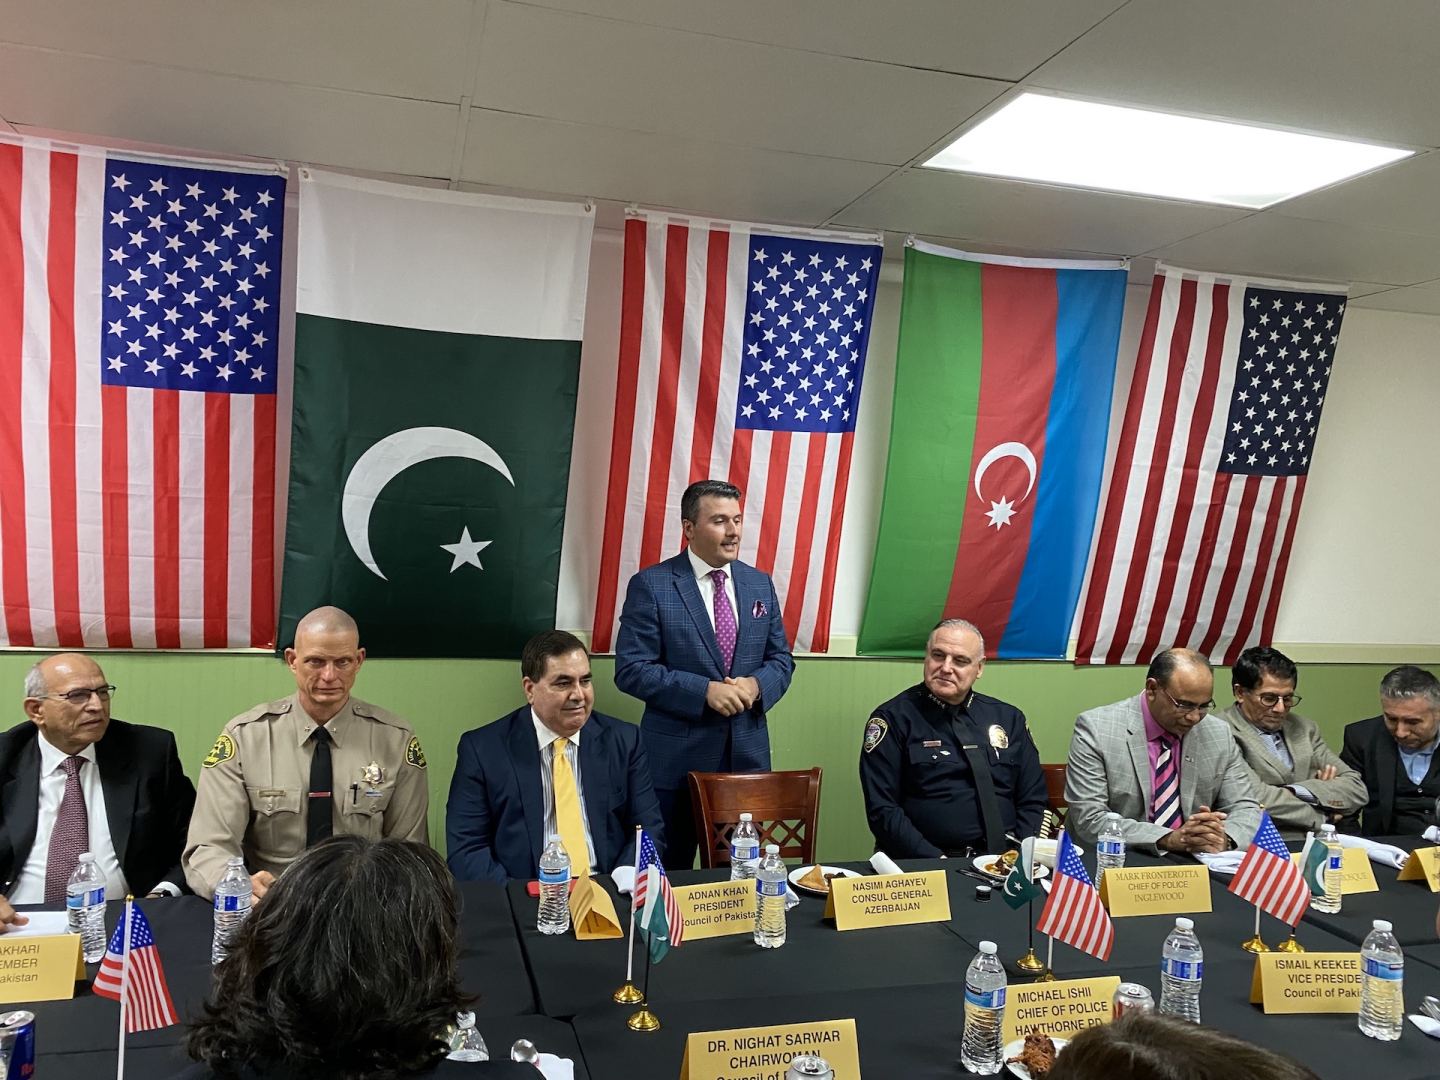 Outcomes of cultural genocide against Azerbaijan discussed in Los Angeles (PHOTO)